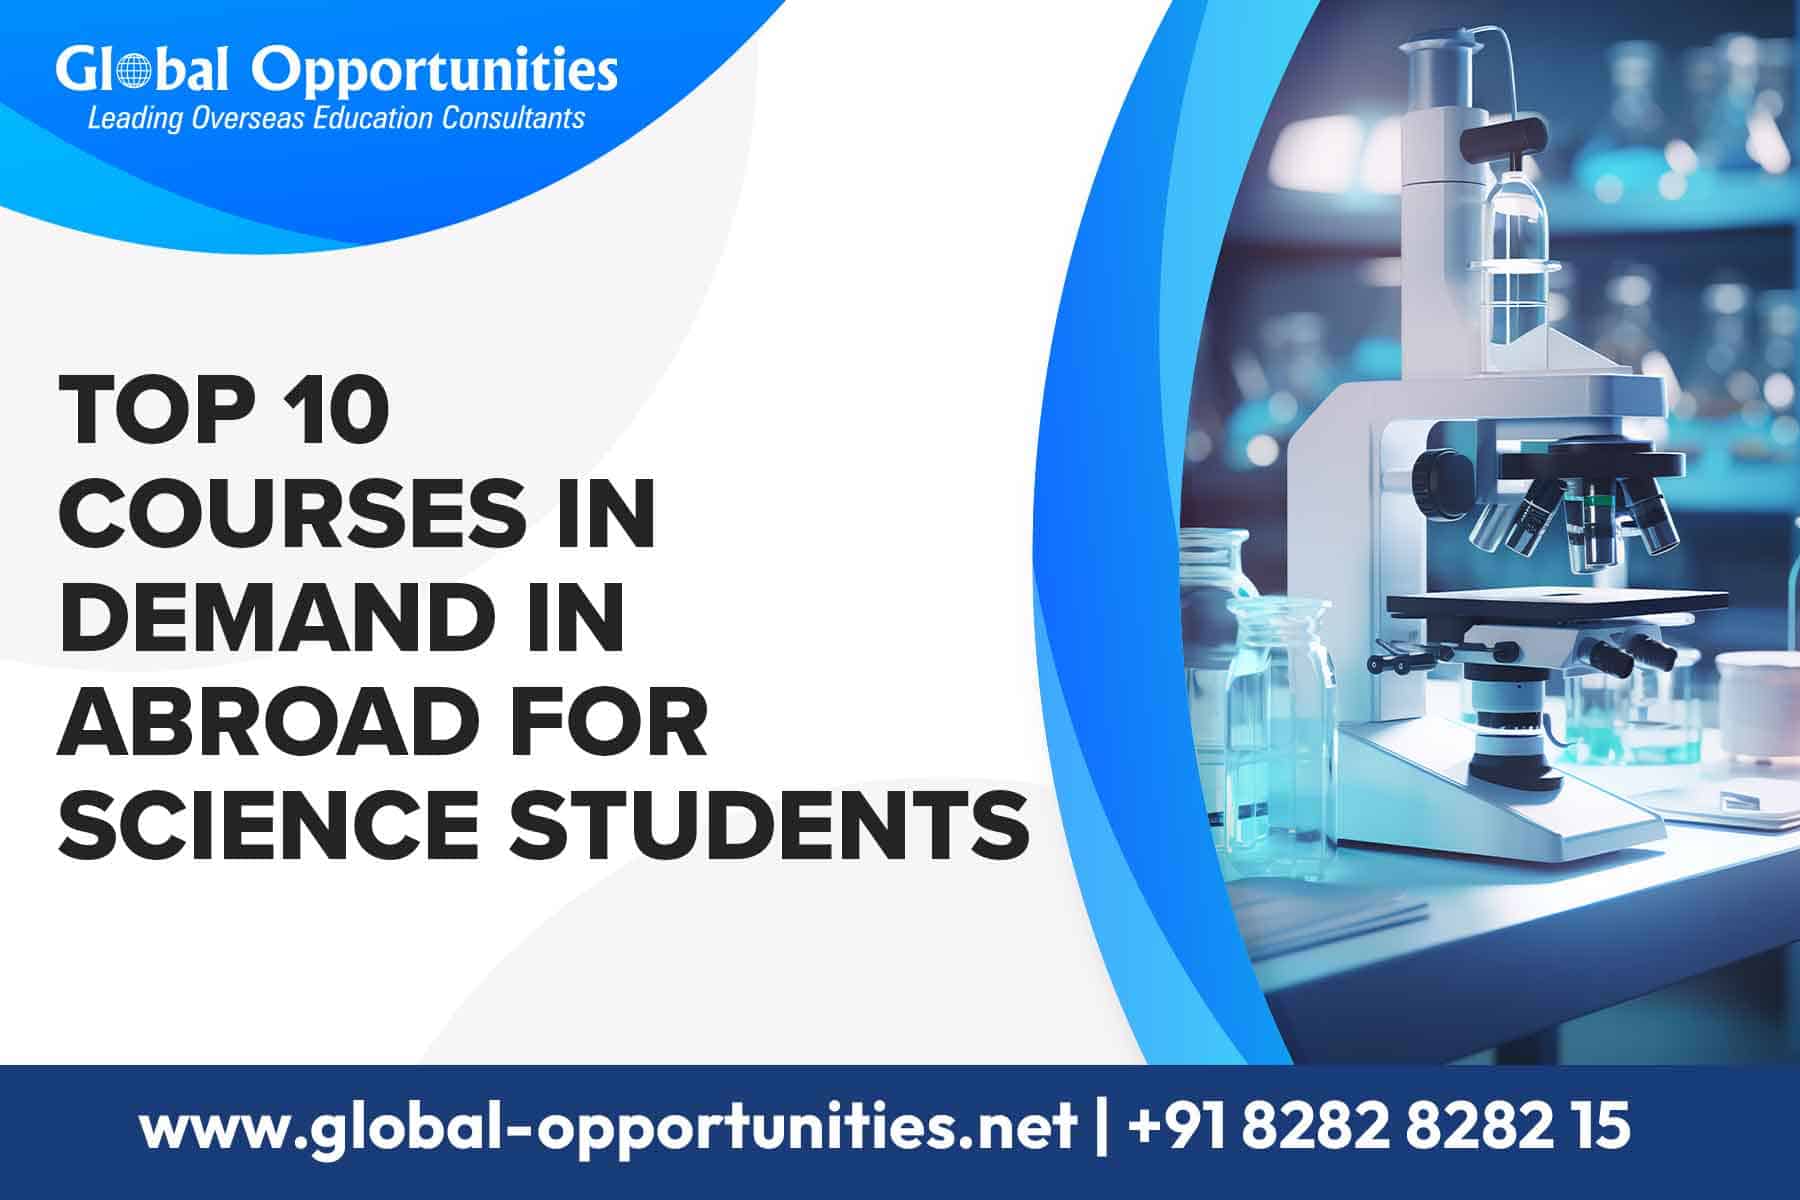 Top 10 Courses in Demand in Abroad for Science Students